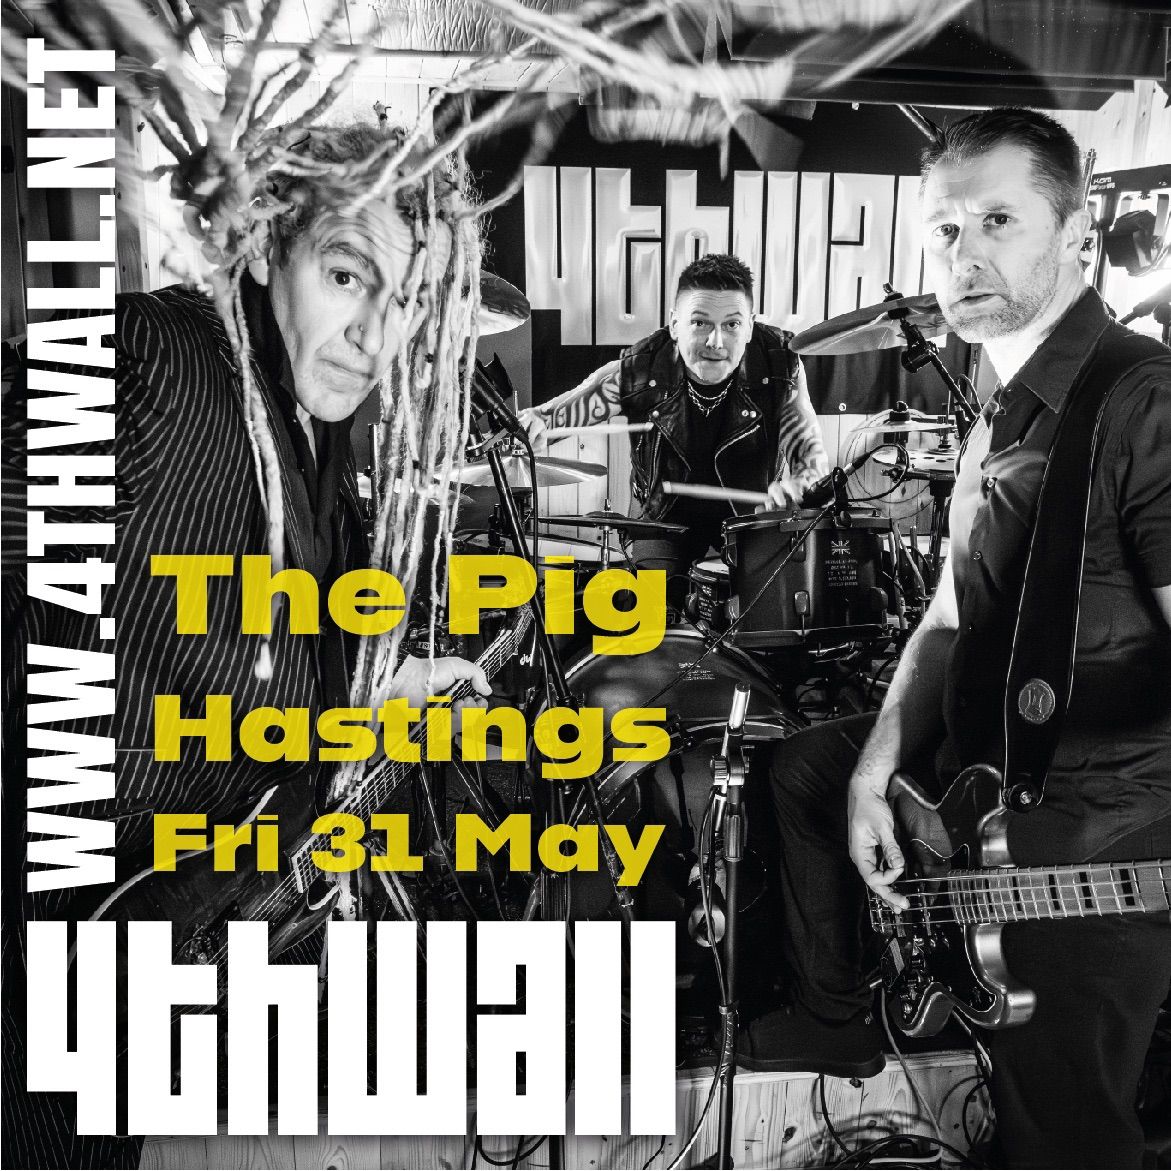 Live at the Pig, Hastings